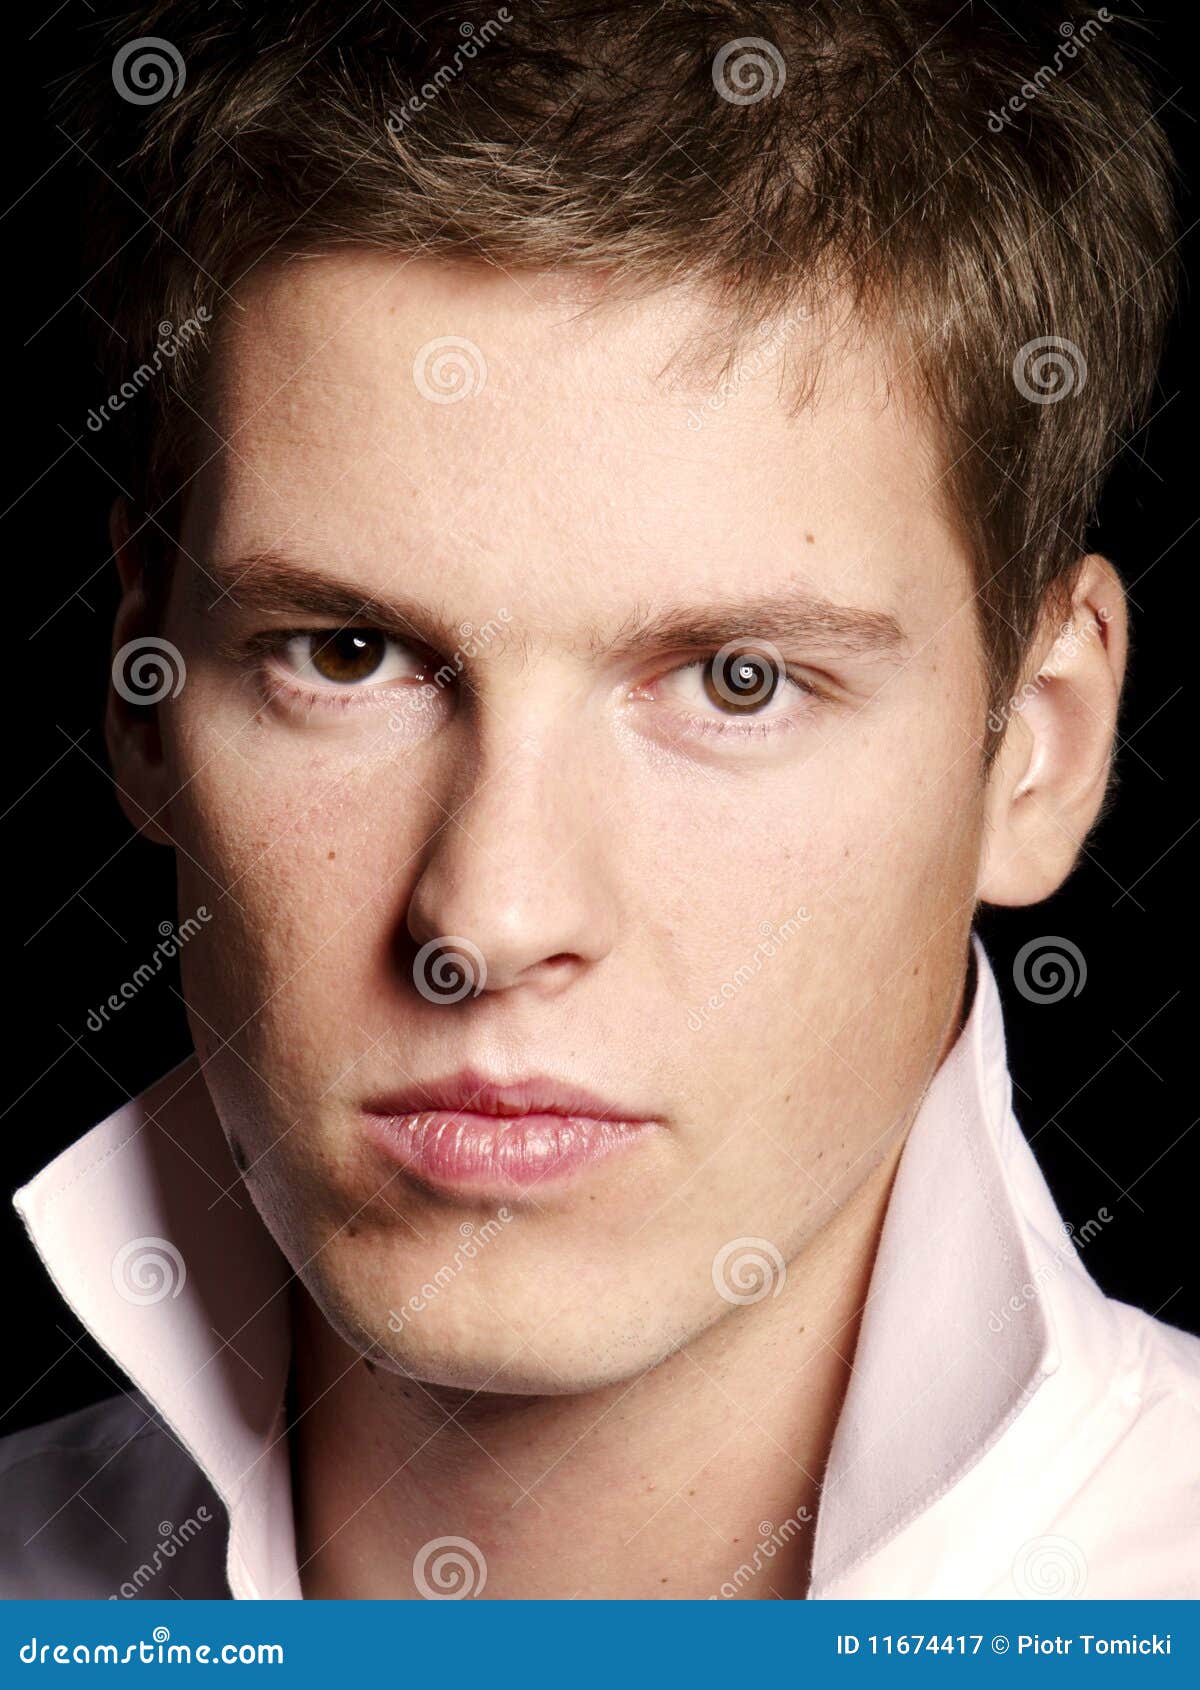 Handsome young male model stock image. Image of expression - 11674417